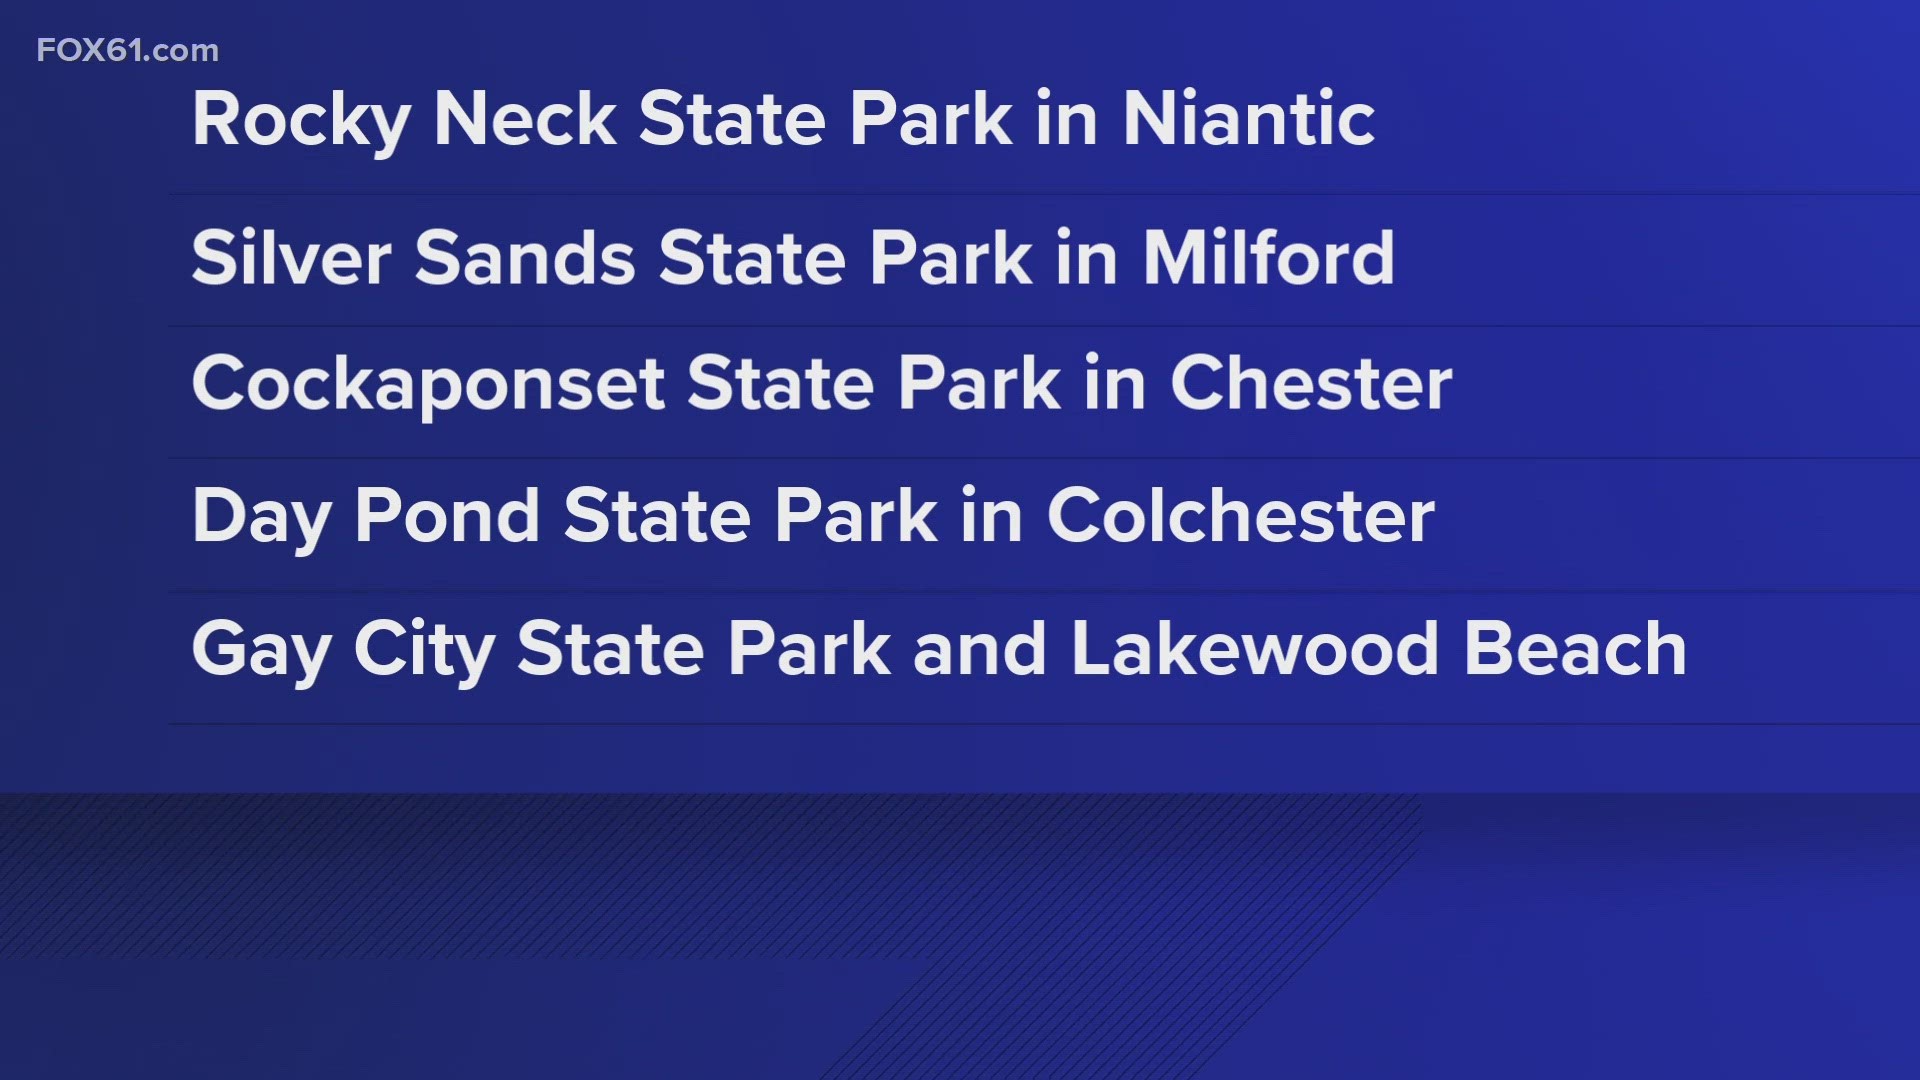 Several state parks have closed off their swimming areas after indicator bacteria were detected.